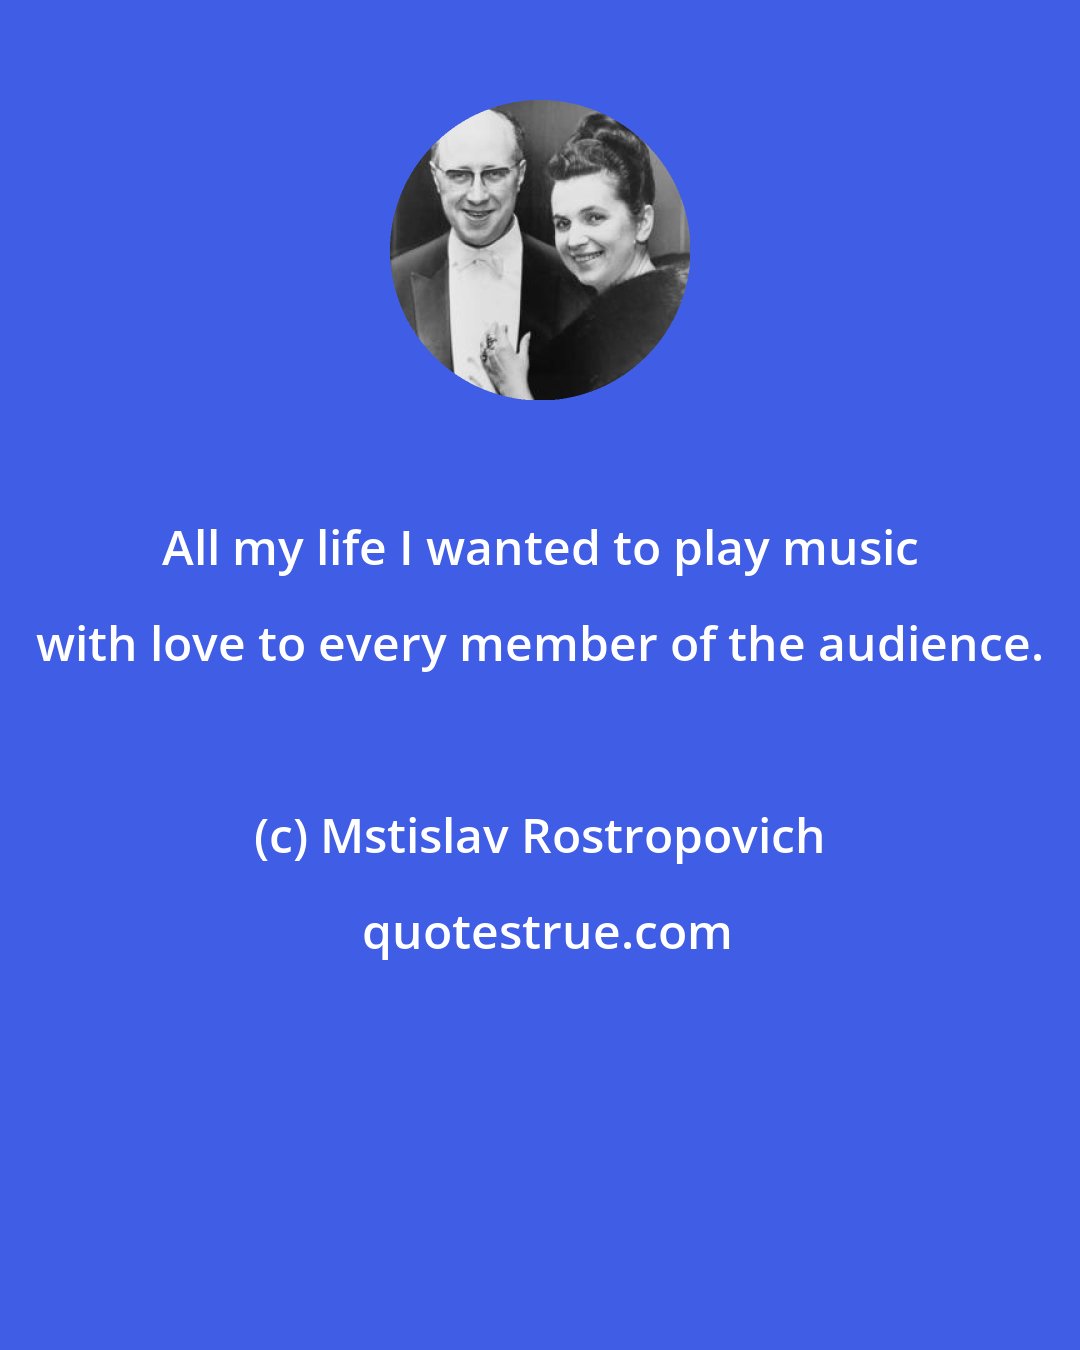 Mstislav Rostropovich: All my life I wanted to play music with love to every member of the audience.